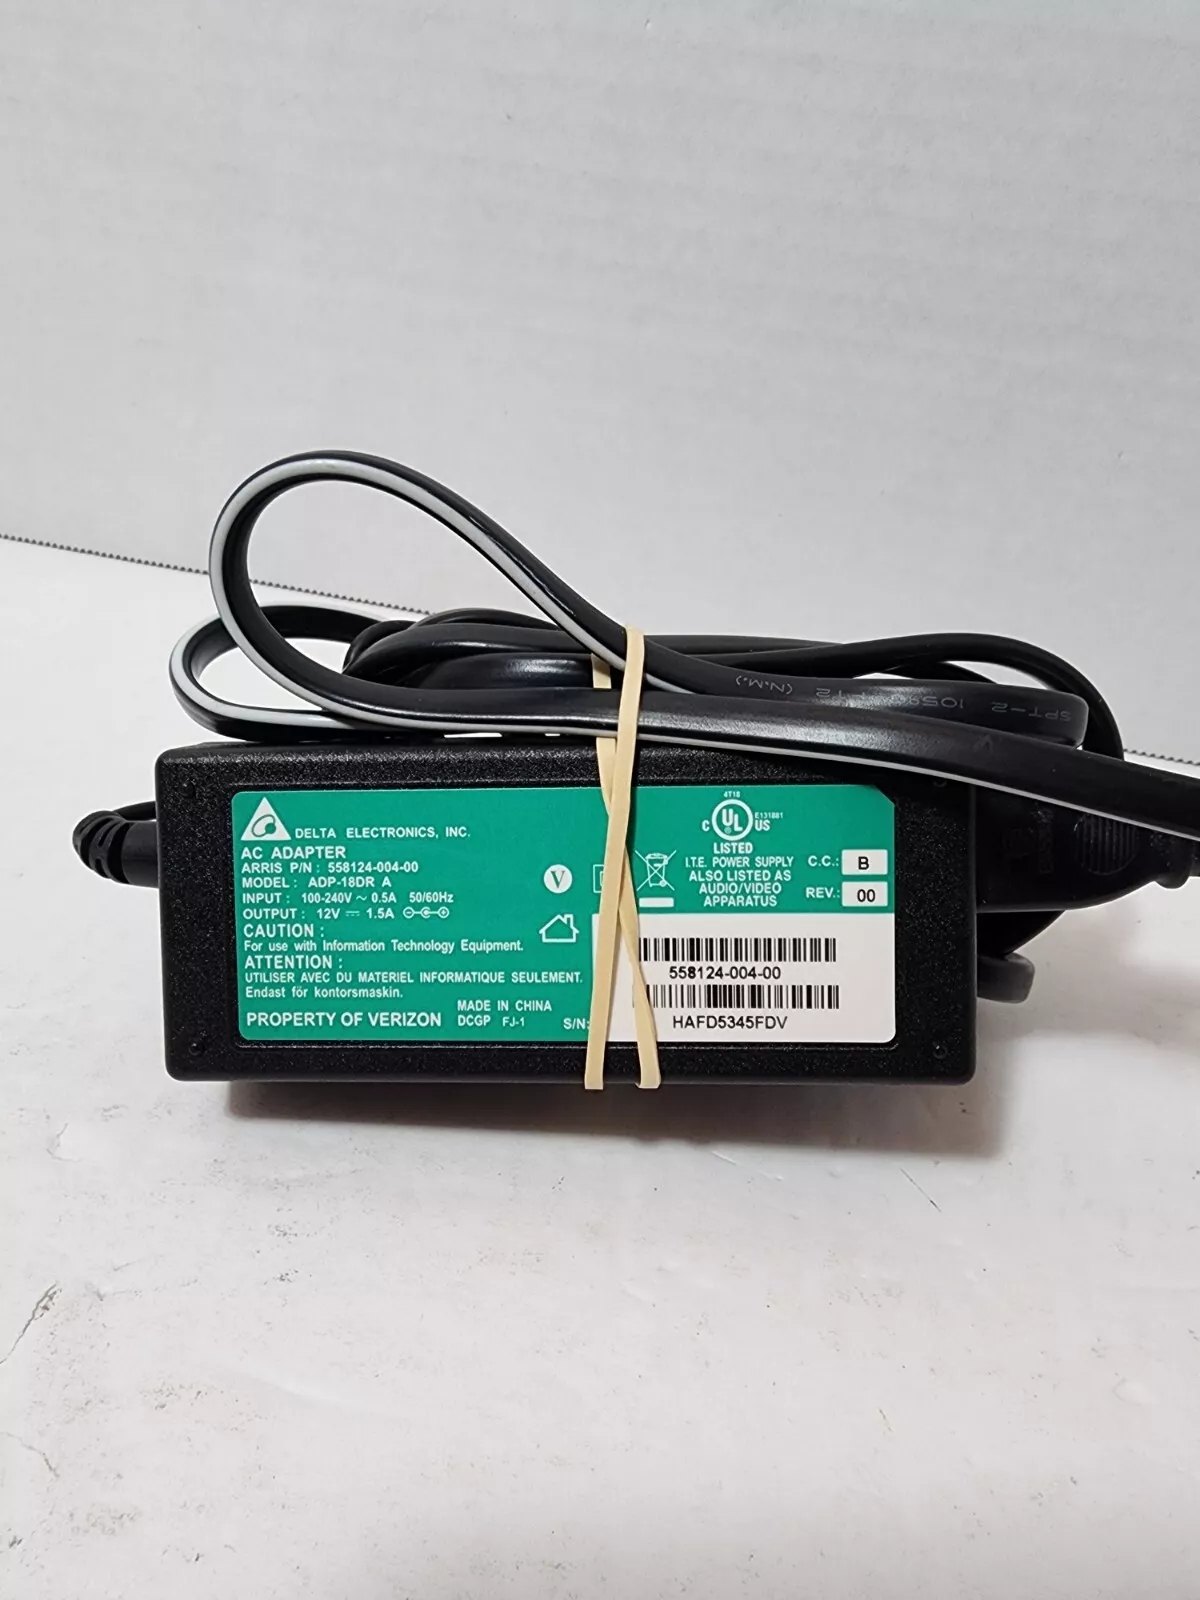 *Brand NEW*Genuine Delta ADP-18DR A 12V 1.5A 18W AC Adapter 558124-004-00 Power Supply - Click Image to Close